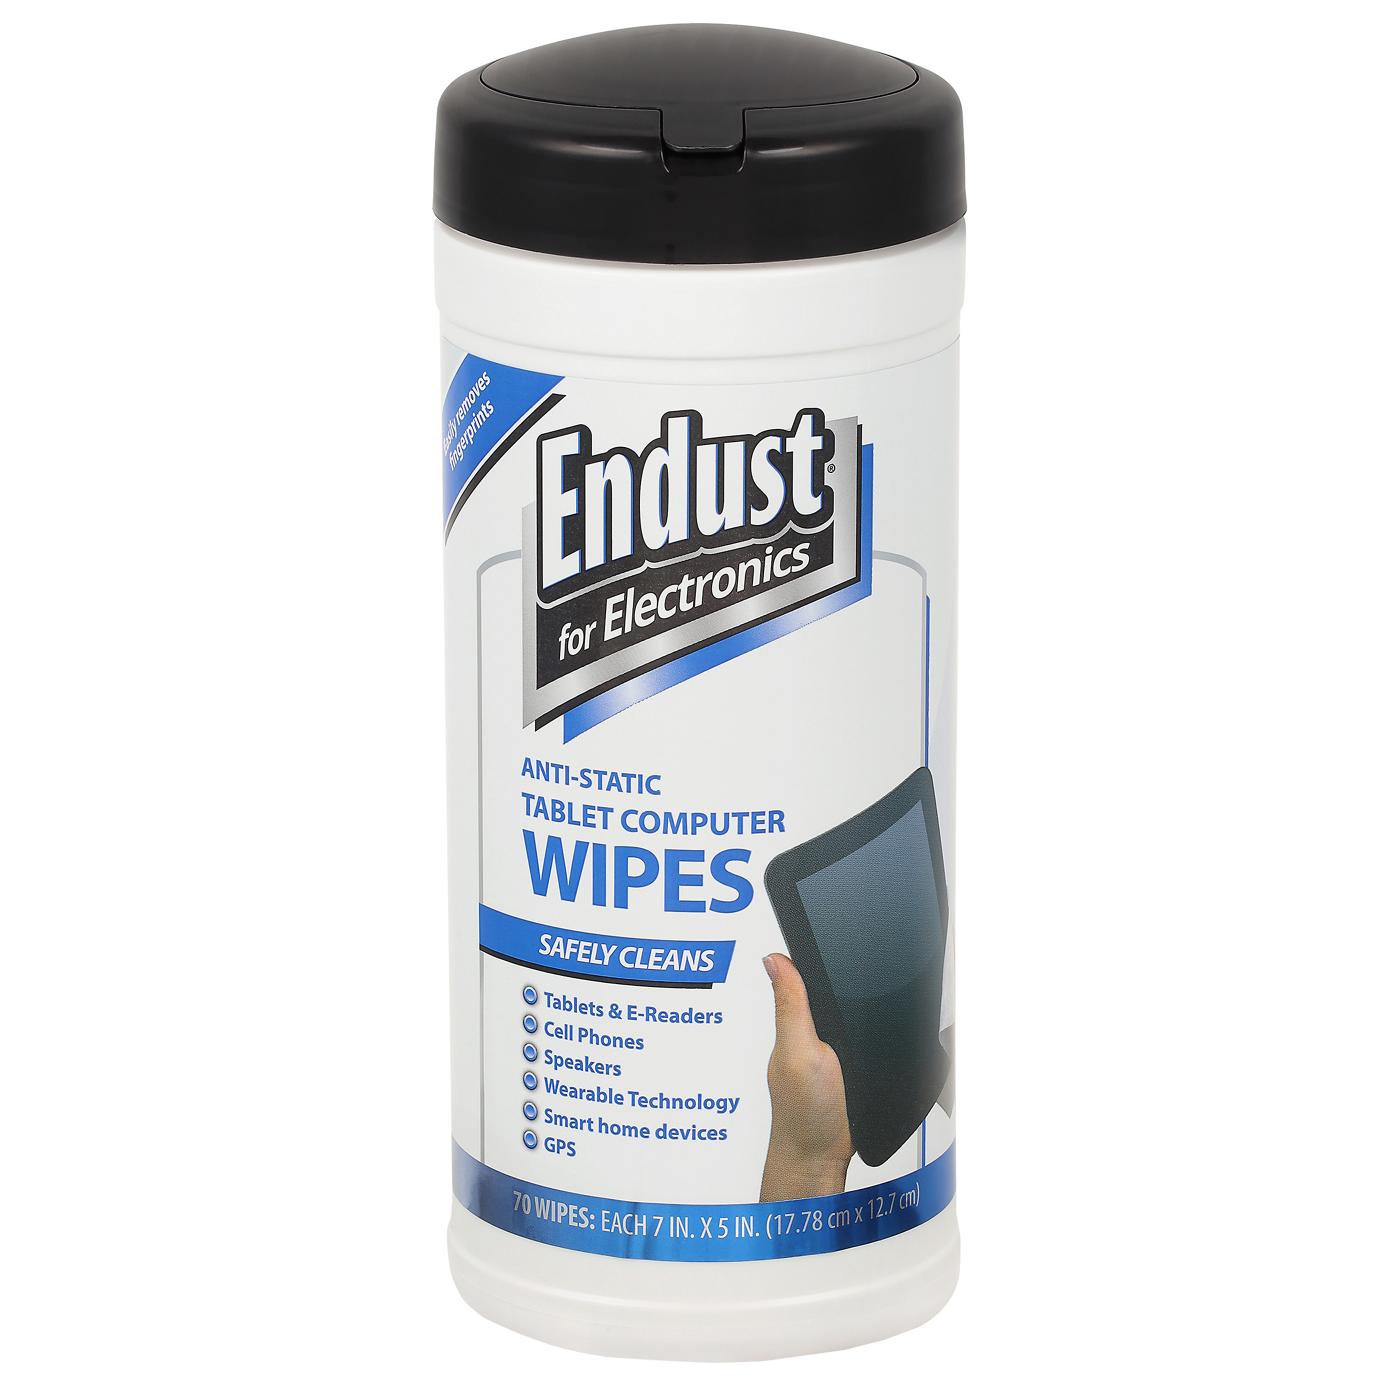 Endust For Electronics Anti-Static Tablet Computer Wipes; image 1 of 2